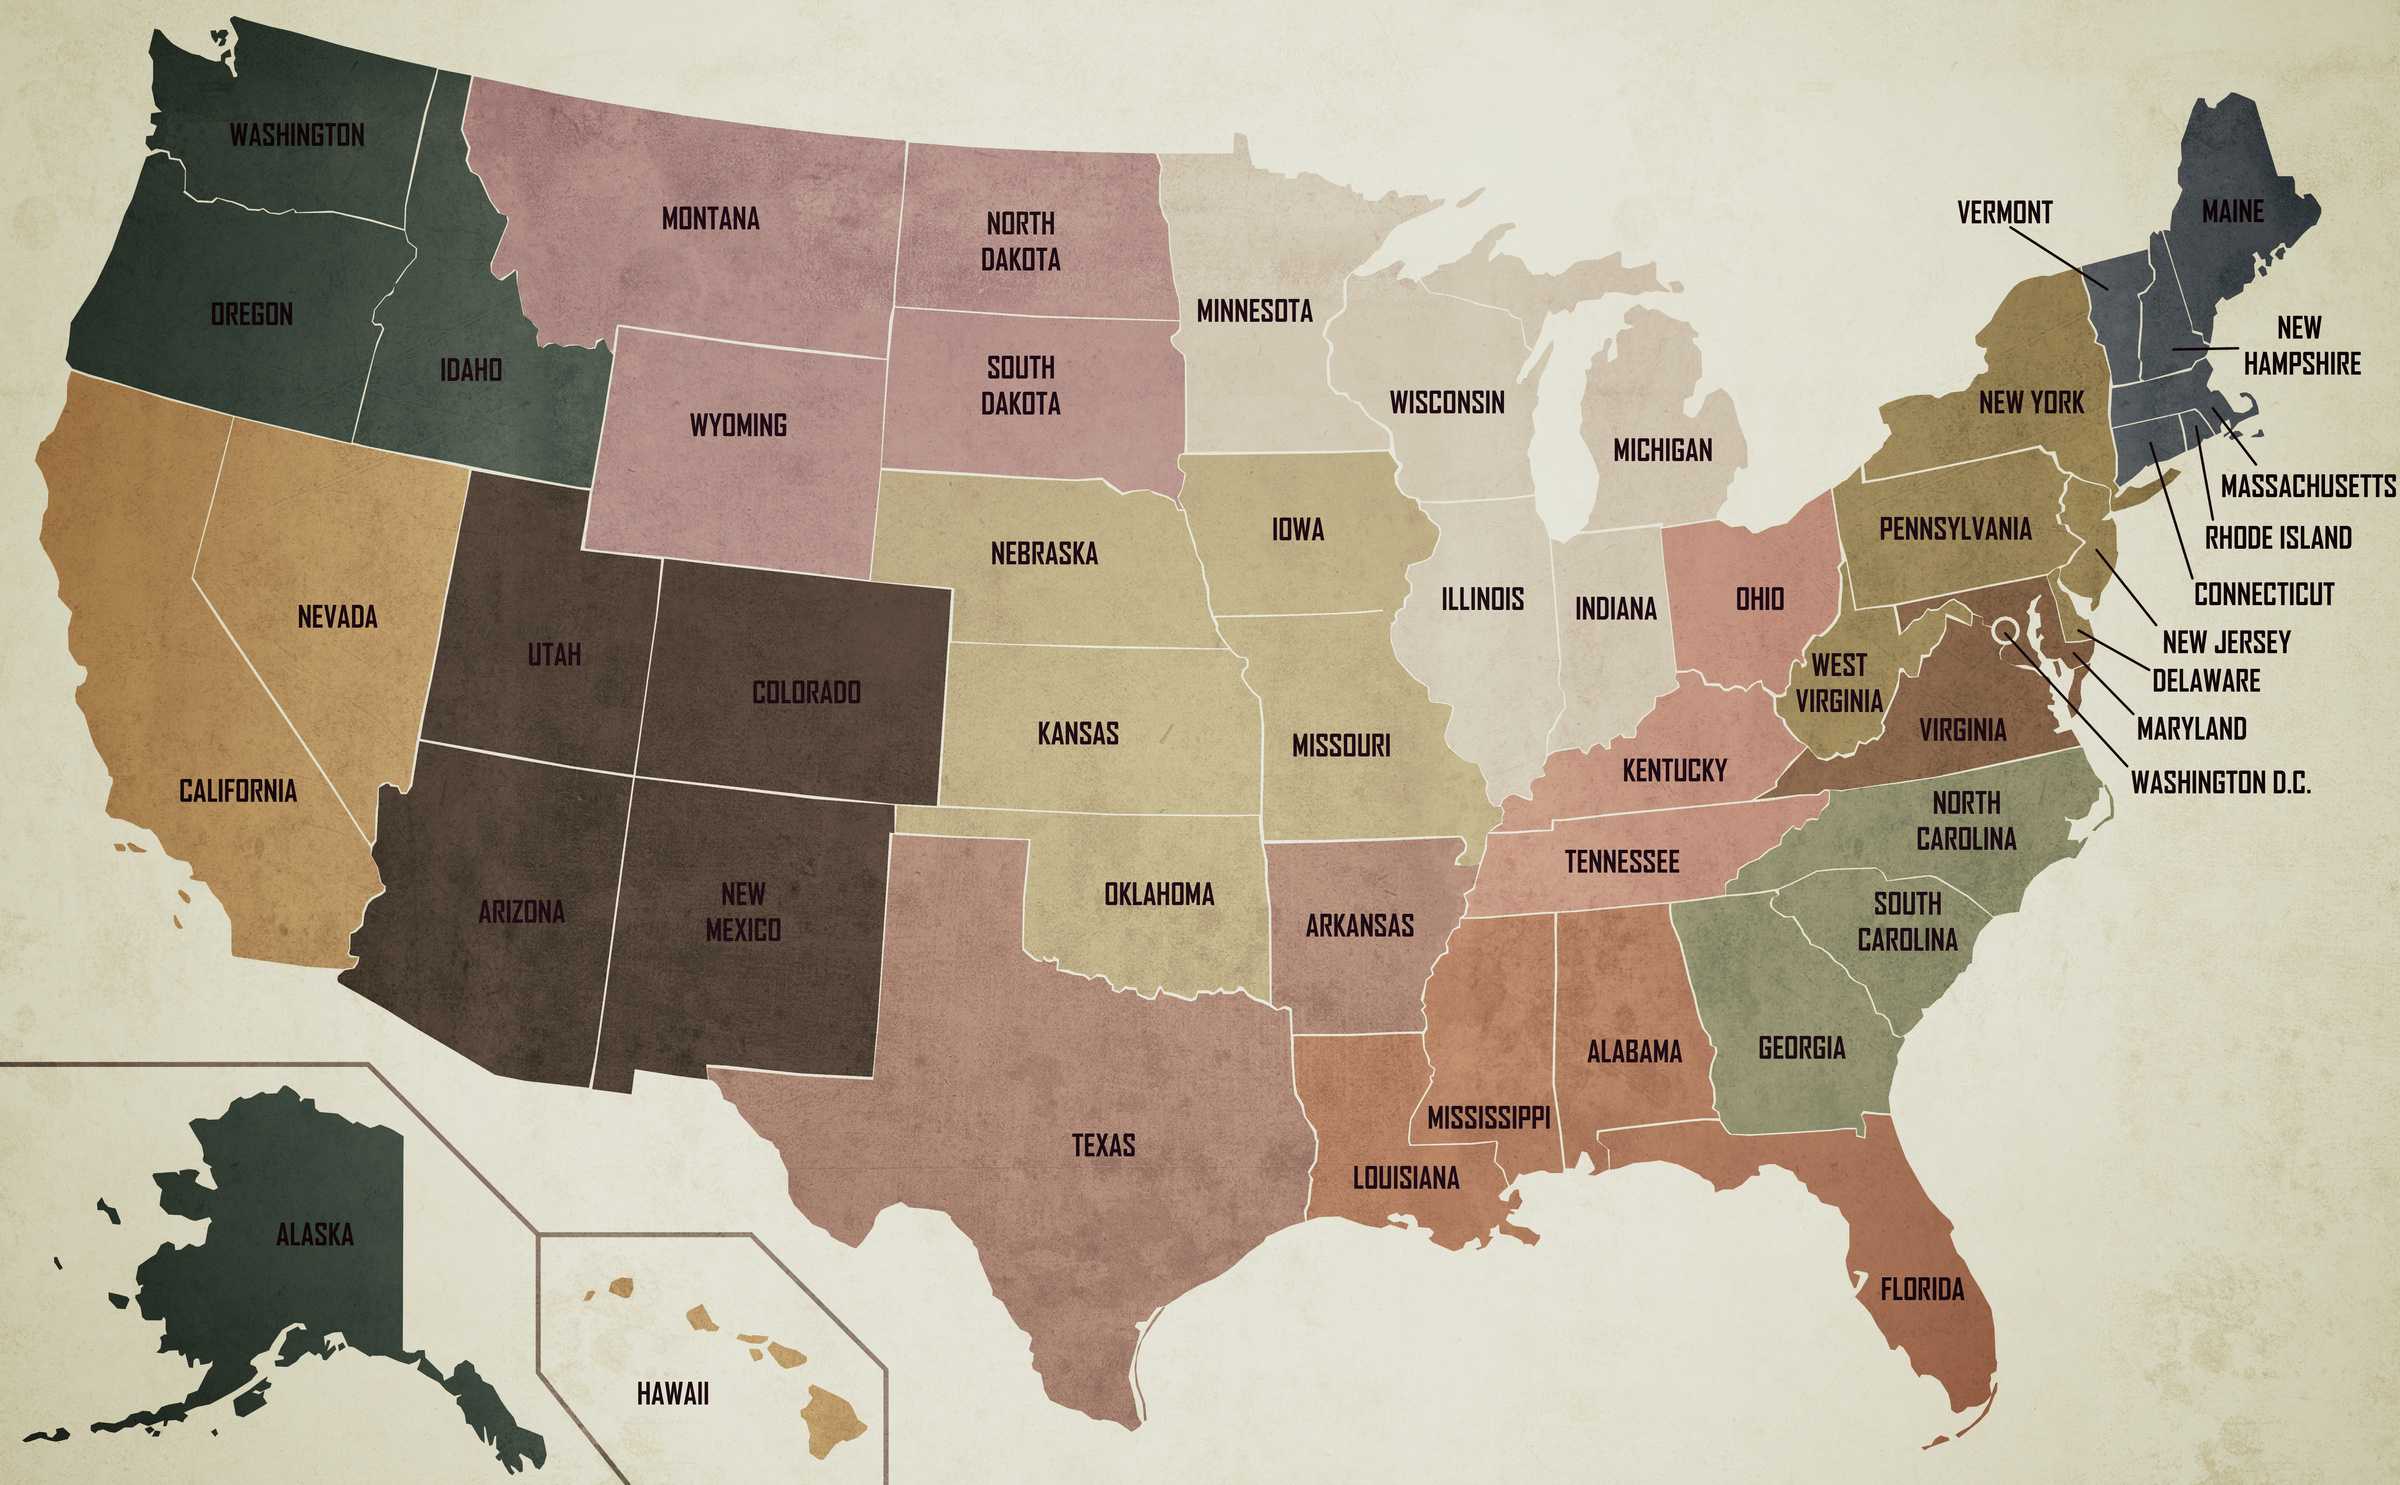 Old Vintage Style Color Map Of U.S.A. With State Names